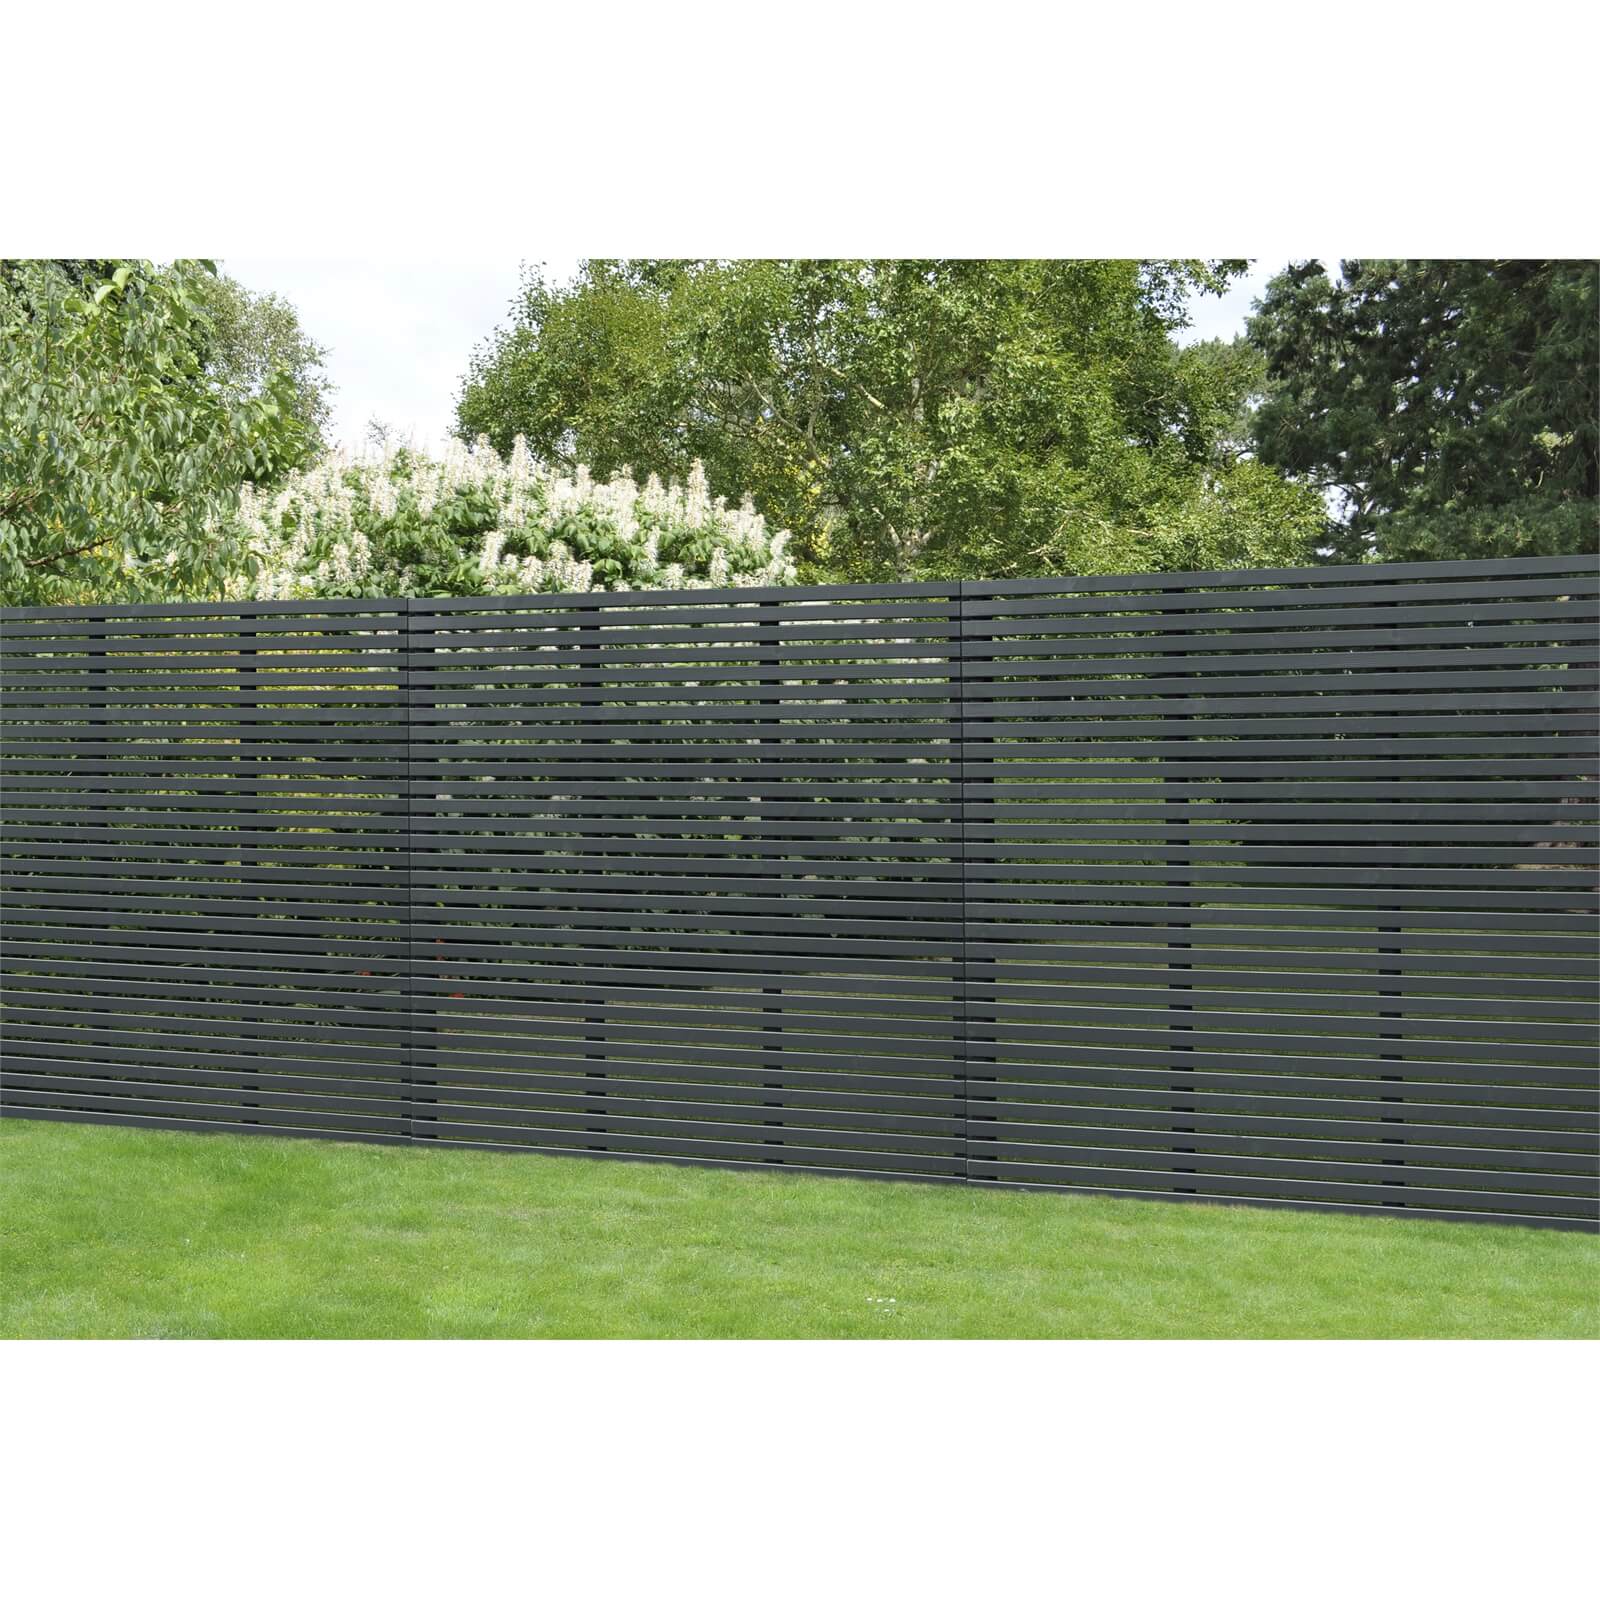 6ft x 6ft (1.8m x 1.8m) Grey Painted Contemporary Slatted Fence Panel - Pack of 3